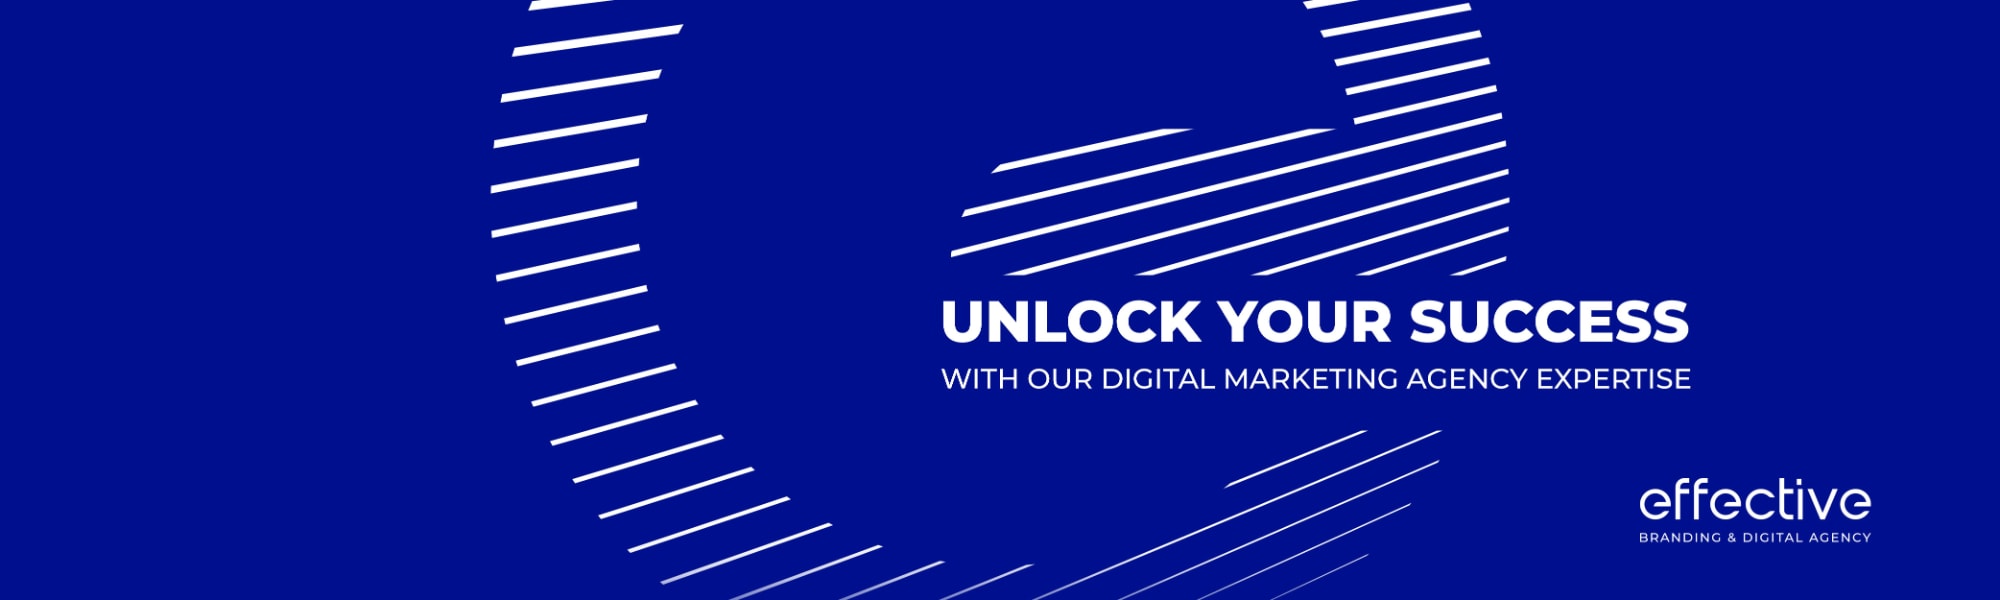 Unlock Your Success with Our Digital Marketing Agency Expertise